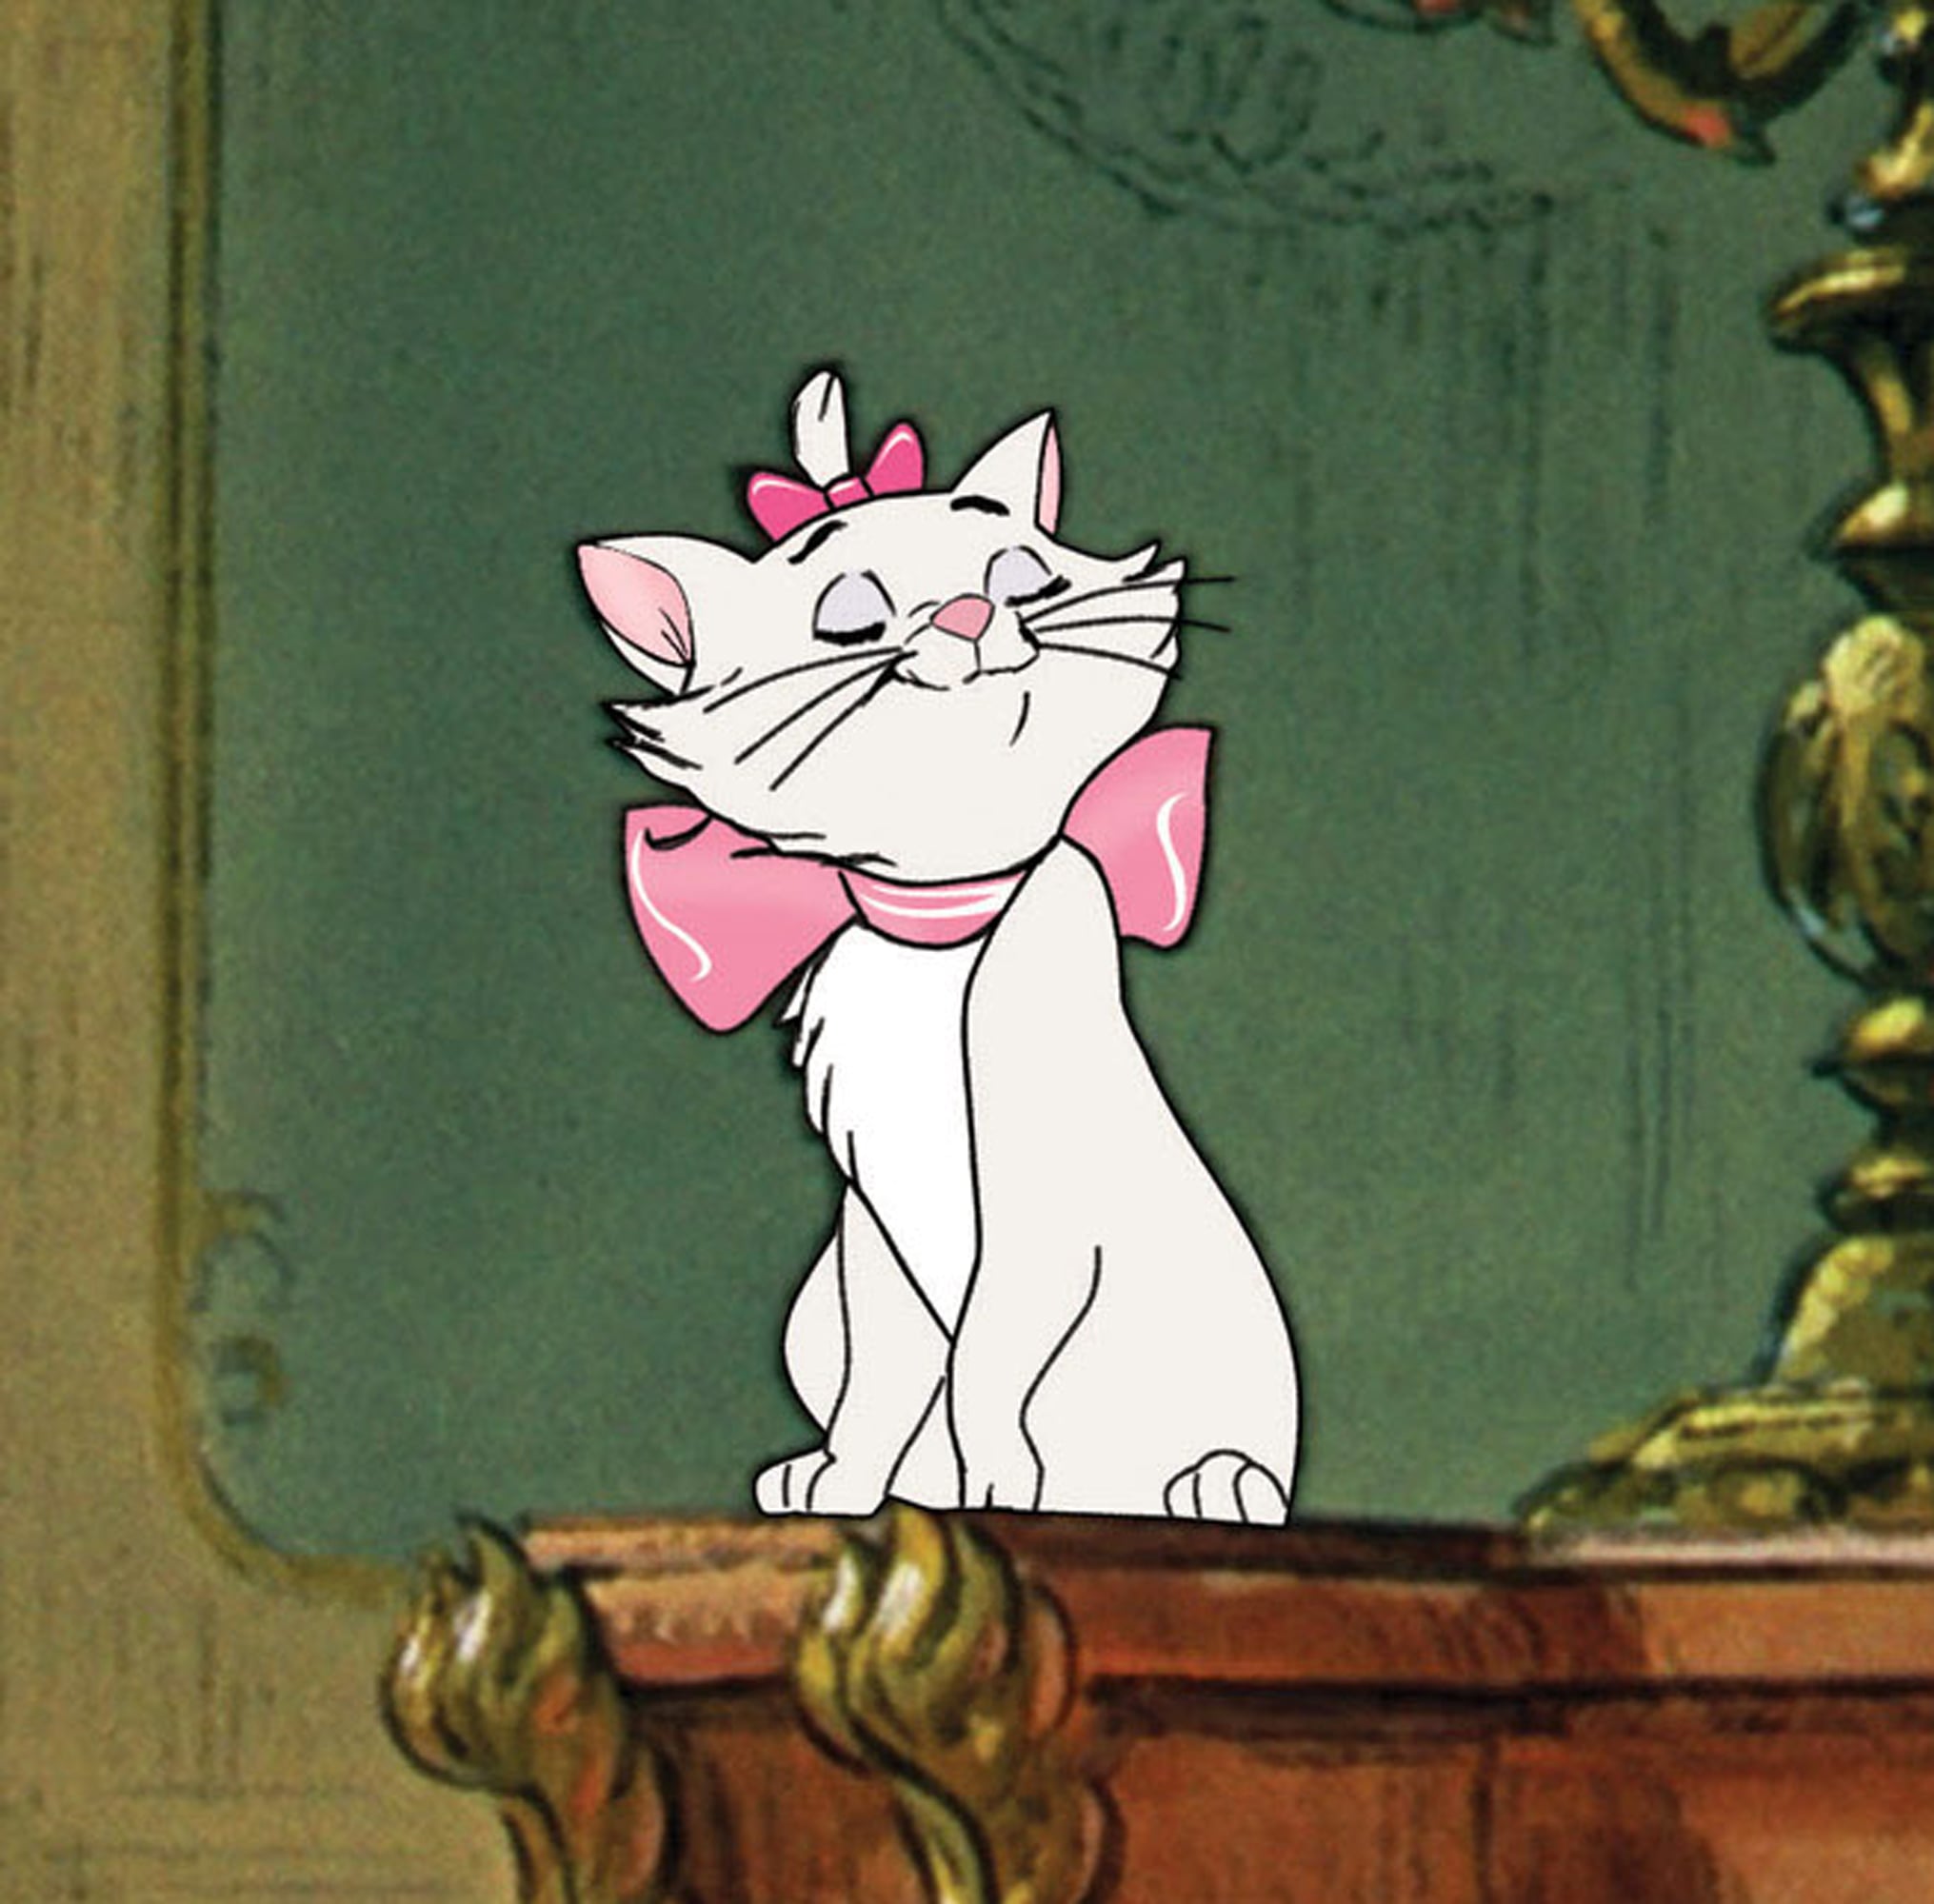 Power of Veto #6 - Madame Adelaide Bonfamille's Will Marie-From-Aristocats